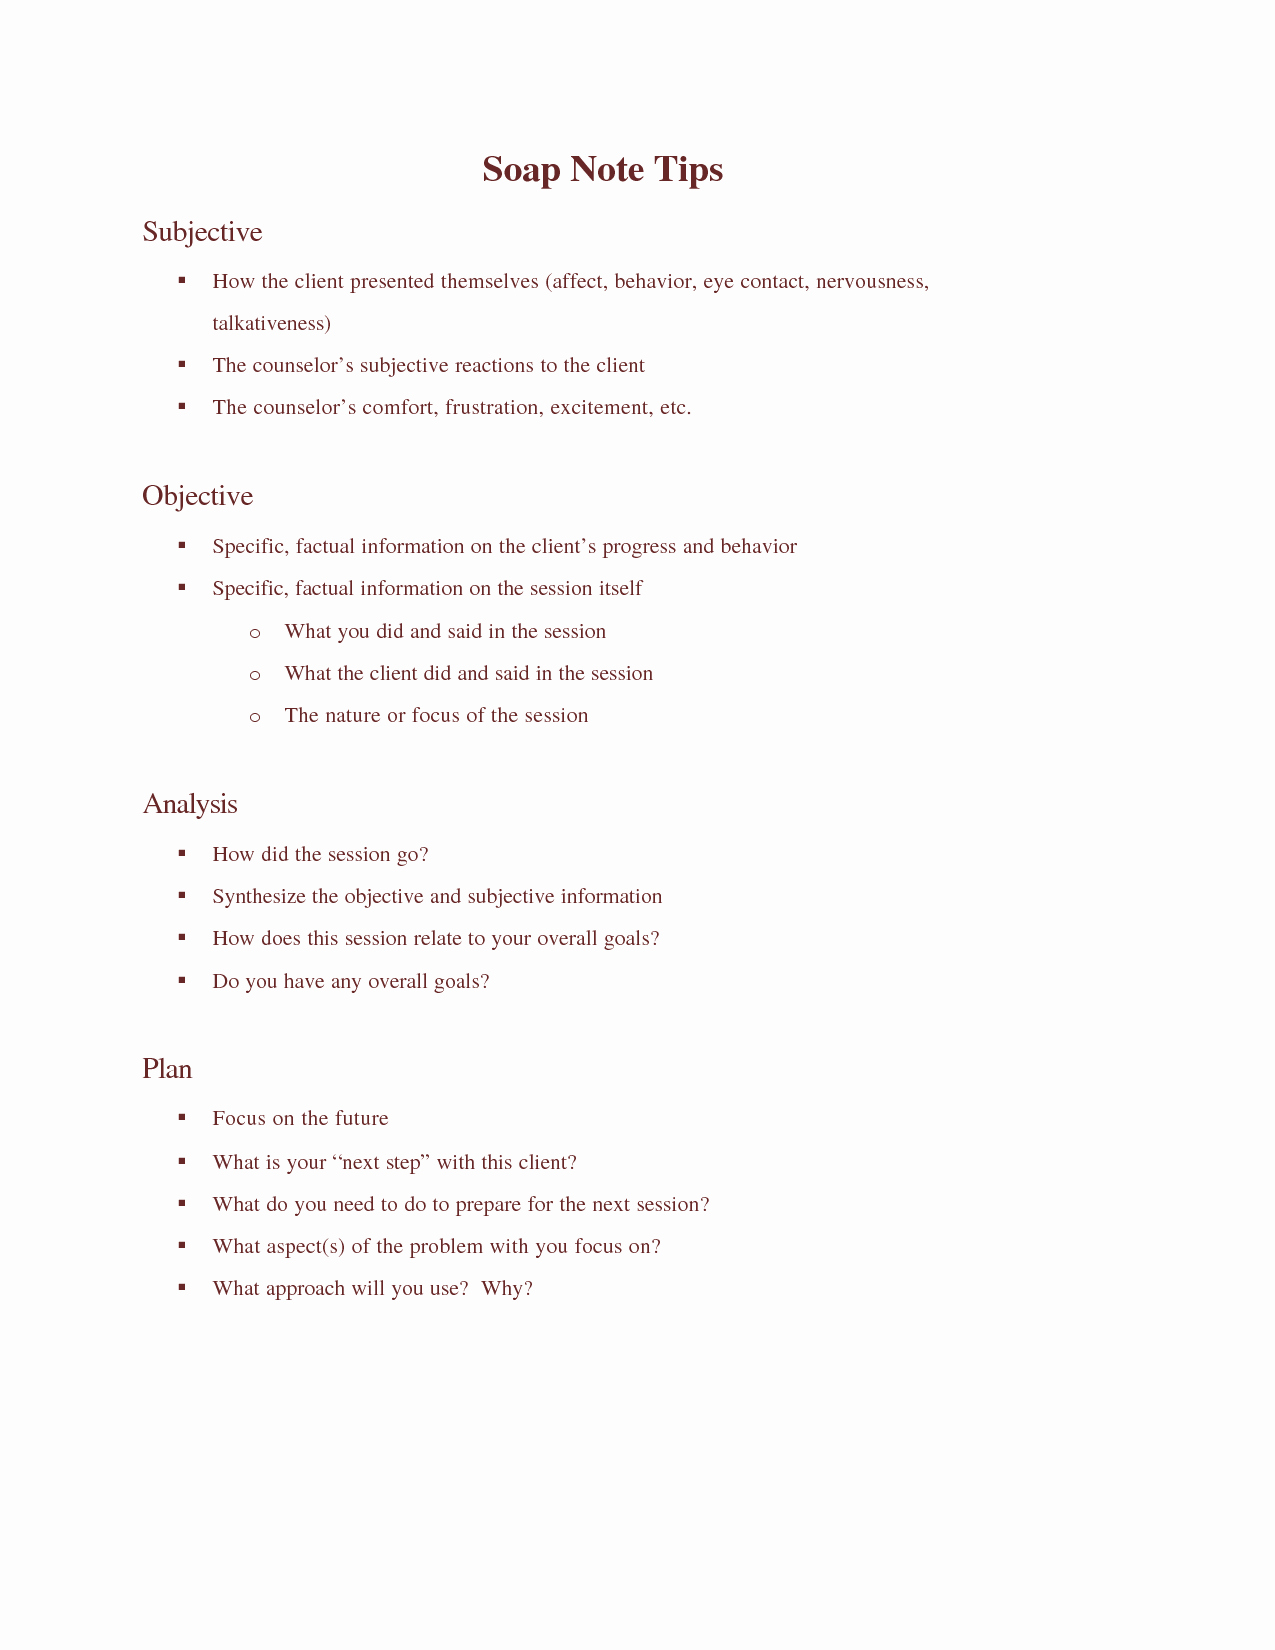 Soap therapy Note Template Beautiful soap Note Templates In This soap Note and Progress Note